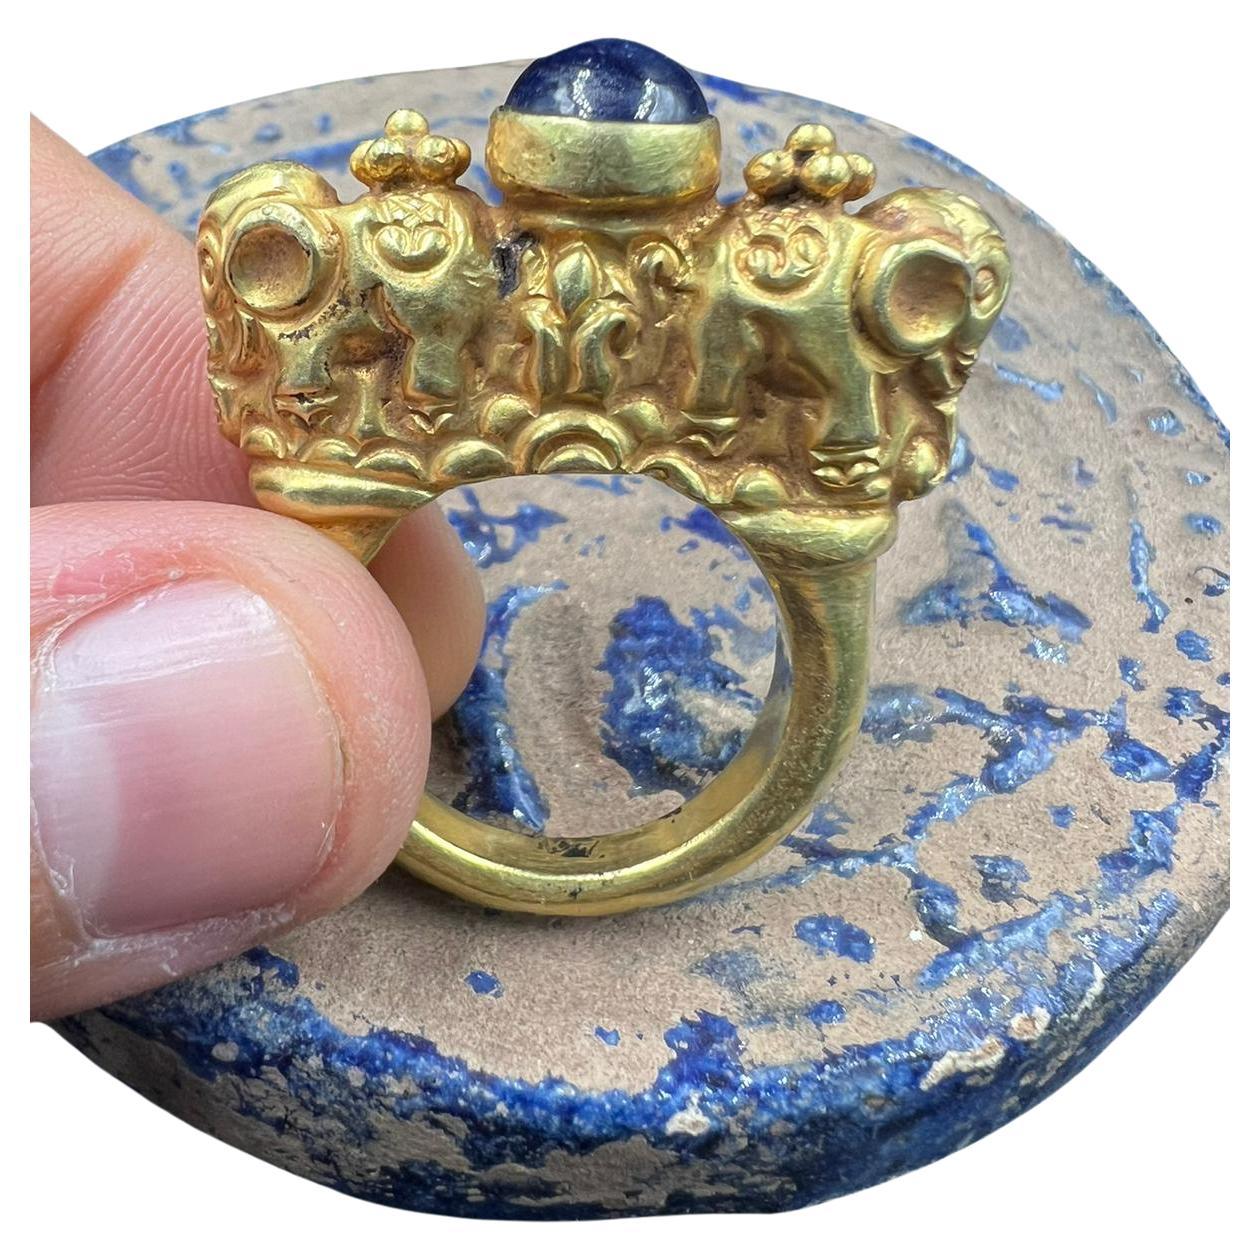 Bochic Curated Antique Ring From Burma 18k Solid Gold & Antique Lapis Lazuli 

This is the kind of ring you see in a Museum
South East Asian Antique Agate Gem Old Burmese Pyu Pagan Gold Ring

This Ring is from the 